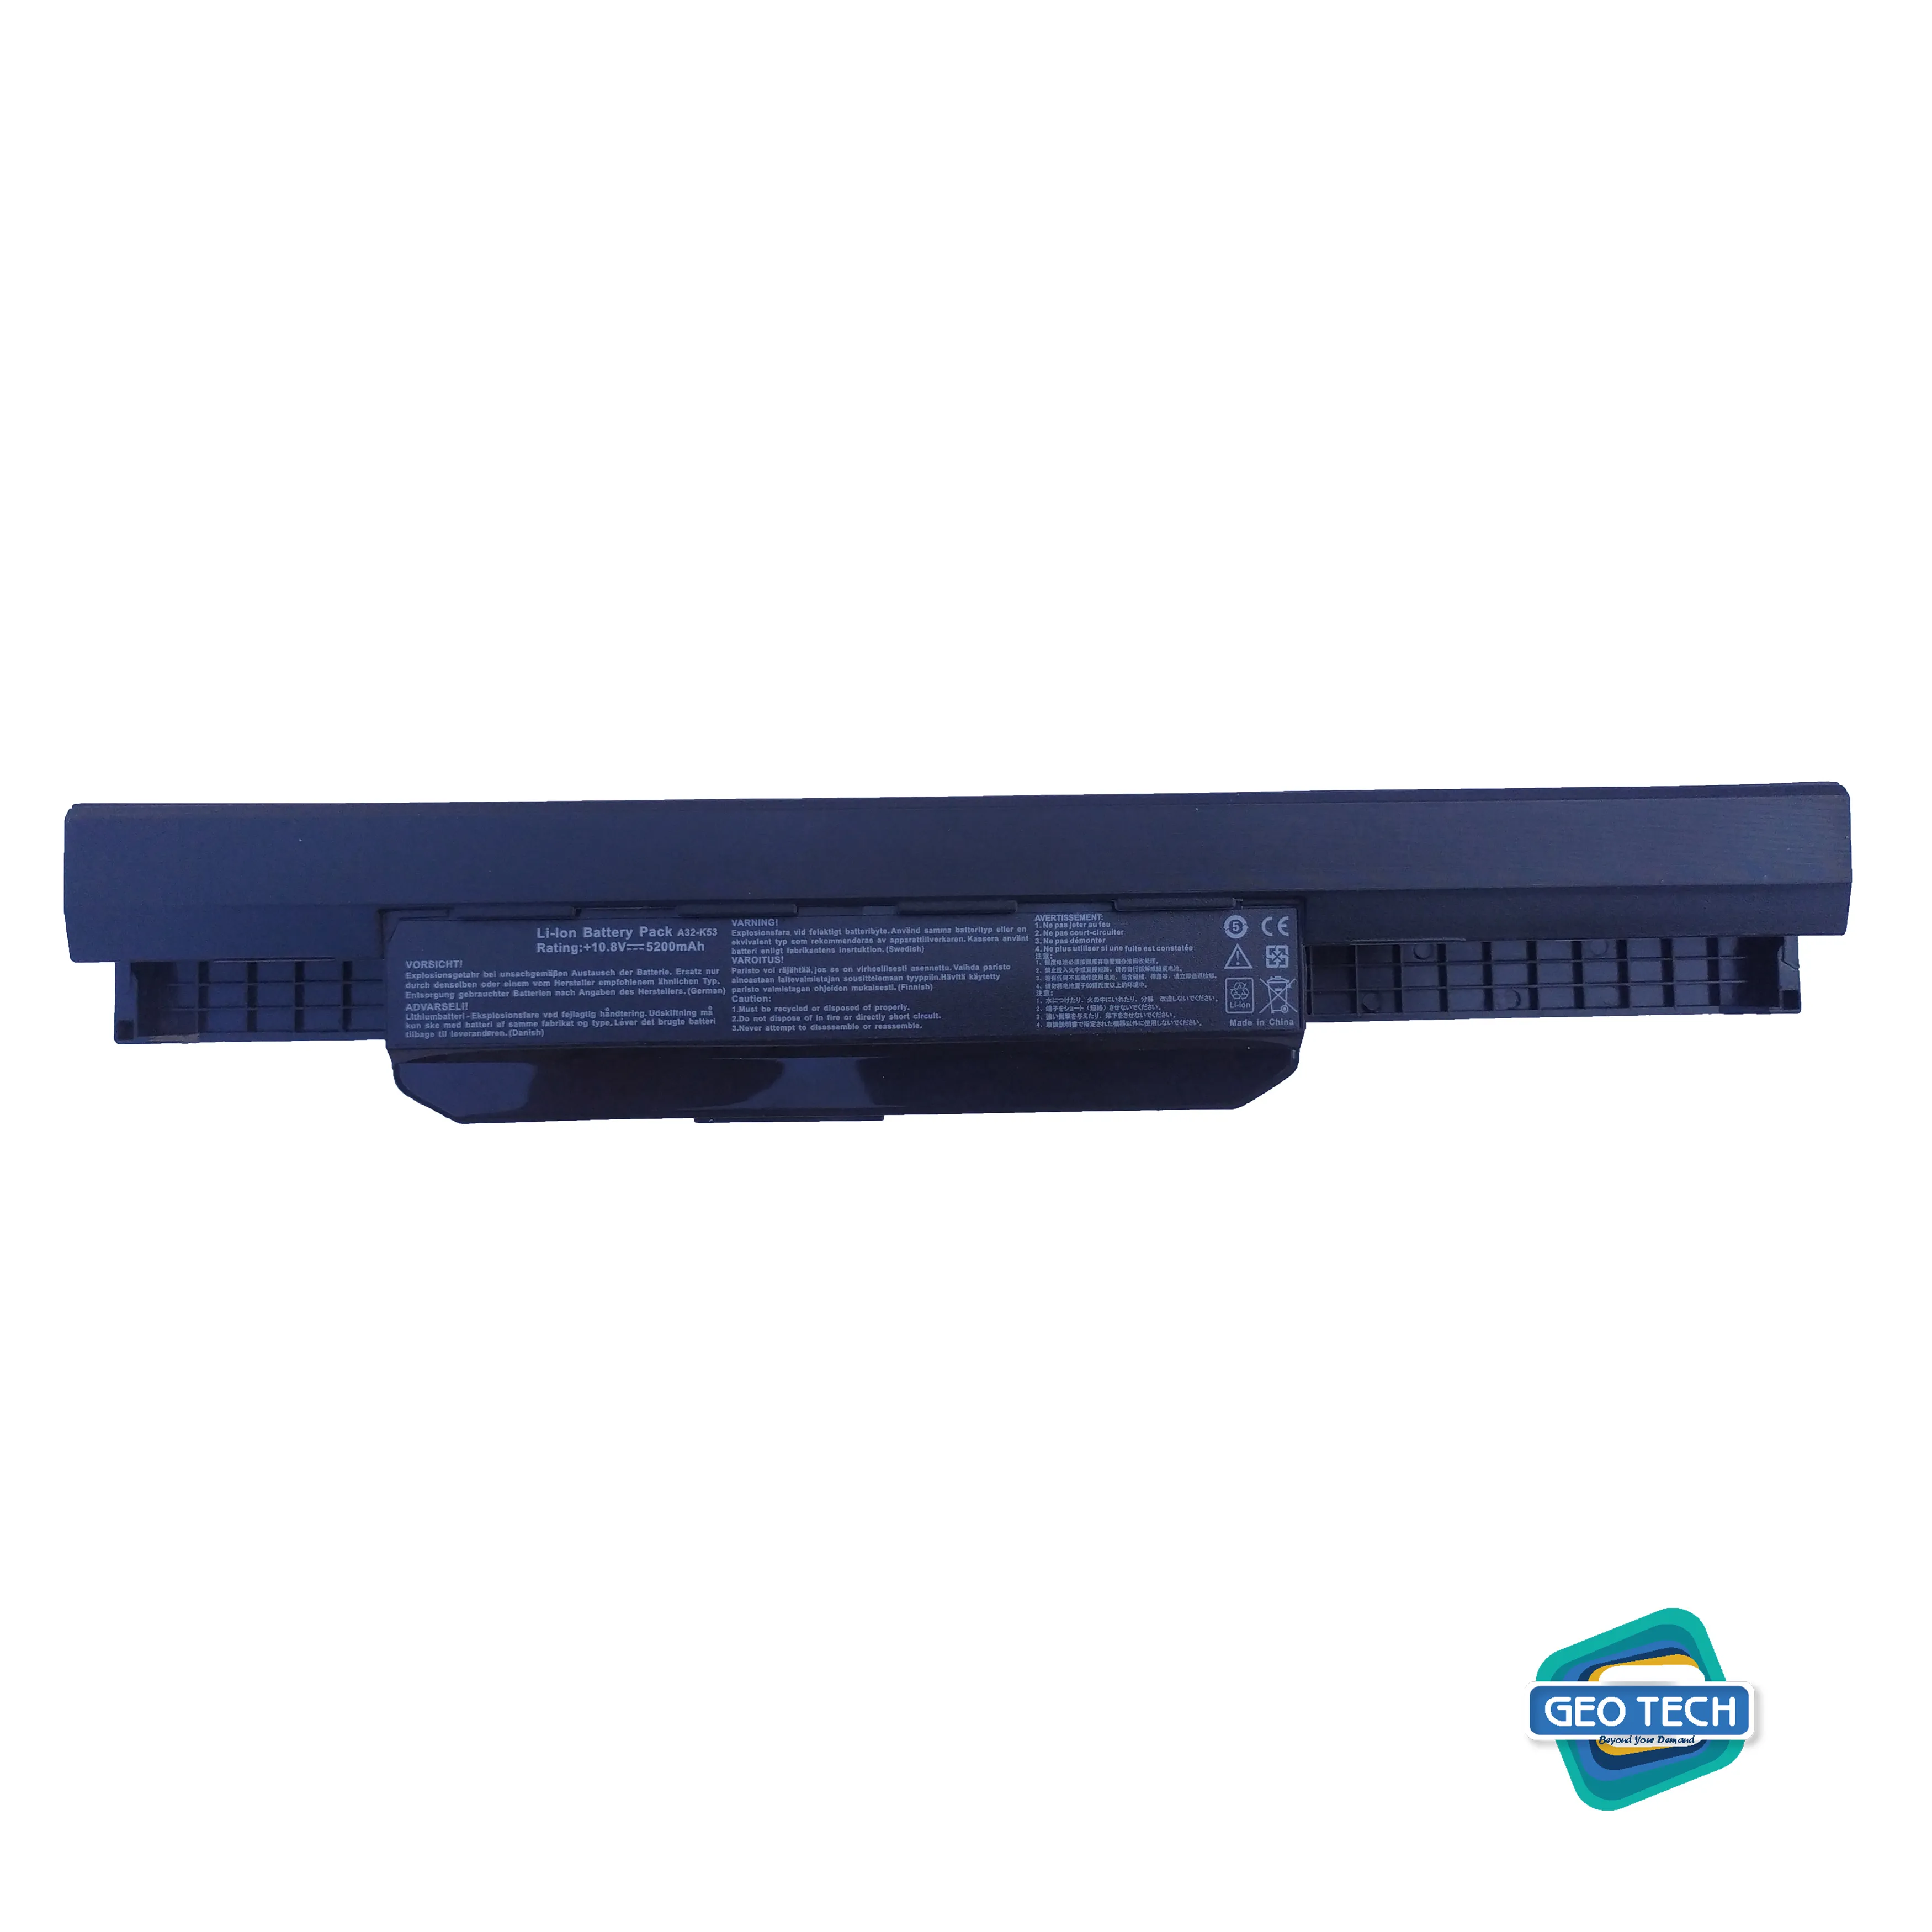 K53 K53E Laptop Battery Compatible with Asus A43 A53 A83 K43 K54 K84 K93 N53 Series Fits A31-K53 A32-K53 A41-K53 A42-K53 A43EI241SV-SL